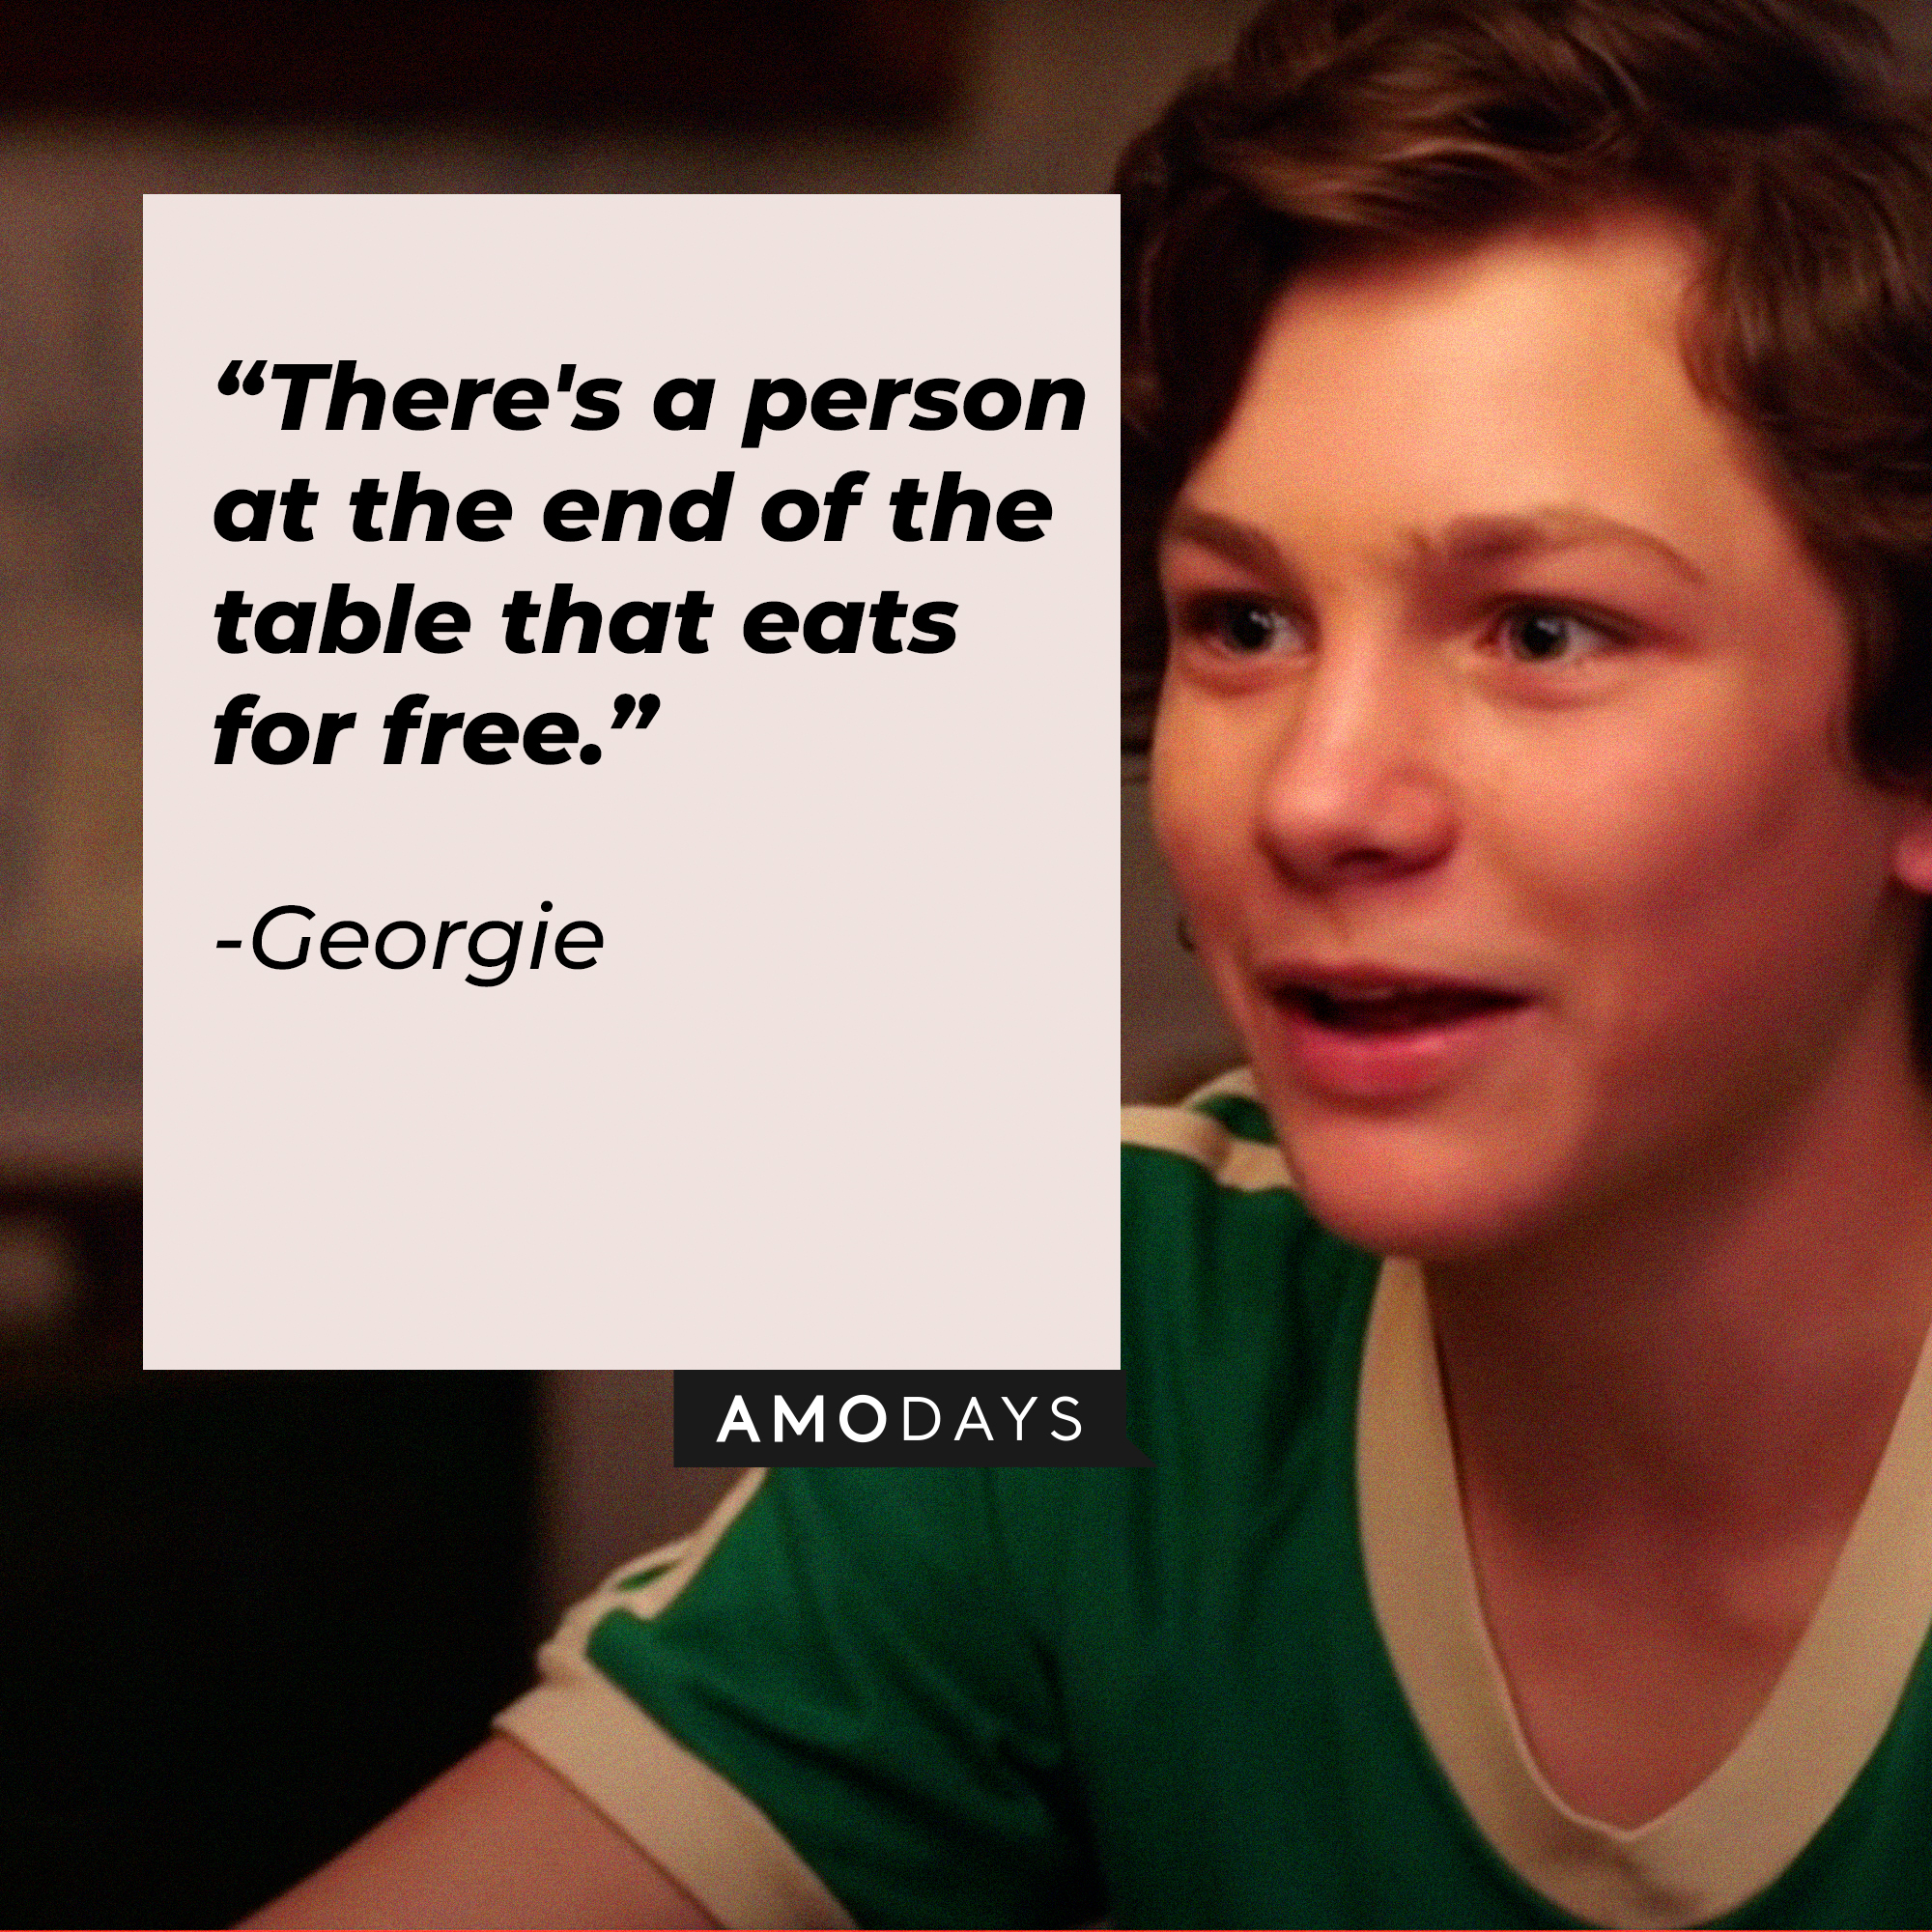 George's quote: “There's a person at the end of the table that eats for free.” | Source: facebook.com/YoungSheldonCBS